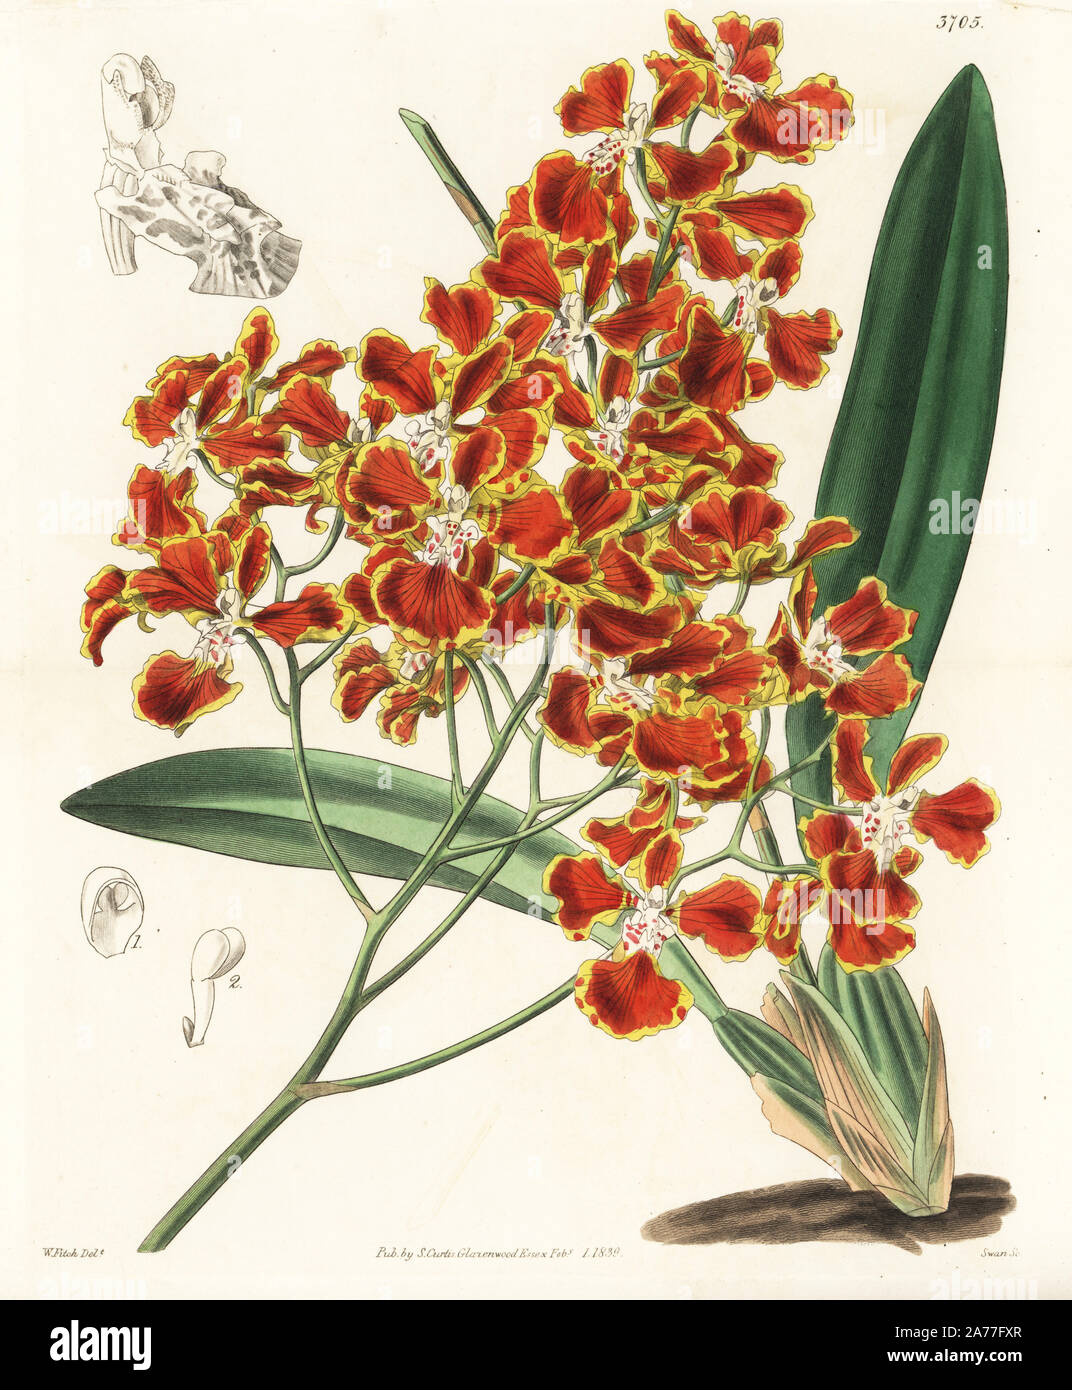 Gomesa forbesii orchid (Forbes' oncidium orchid, Oncidium forbesii). Handcoloured copperplate engraving after a botanical illustration by Walter Fitch from William Jackson Hooker's Botanical Magazine, London, 1838. Stock Photo